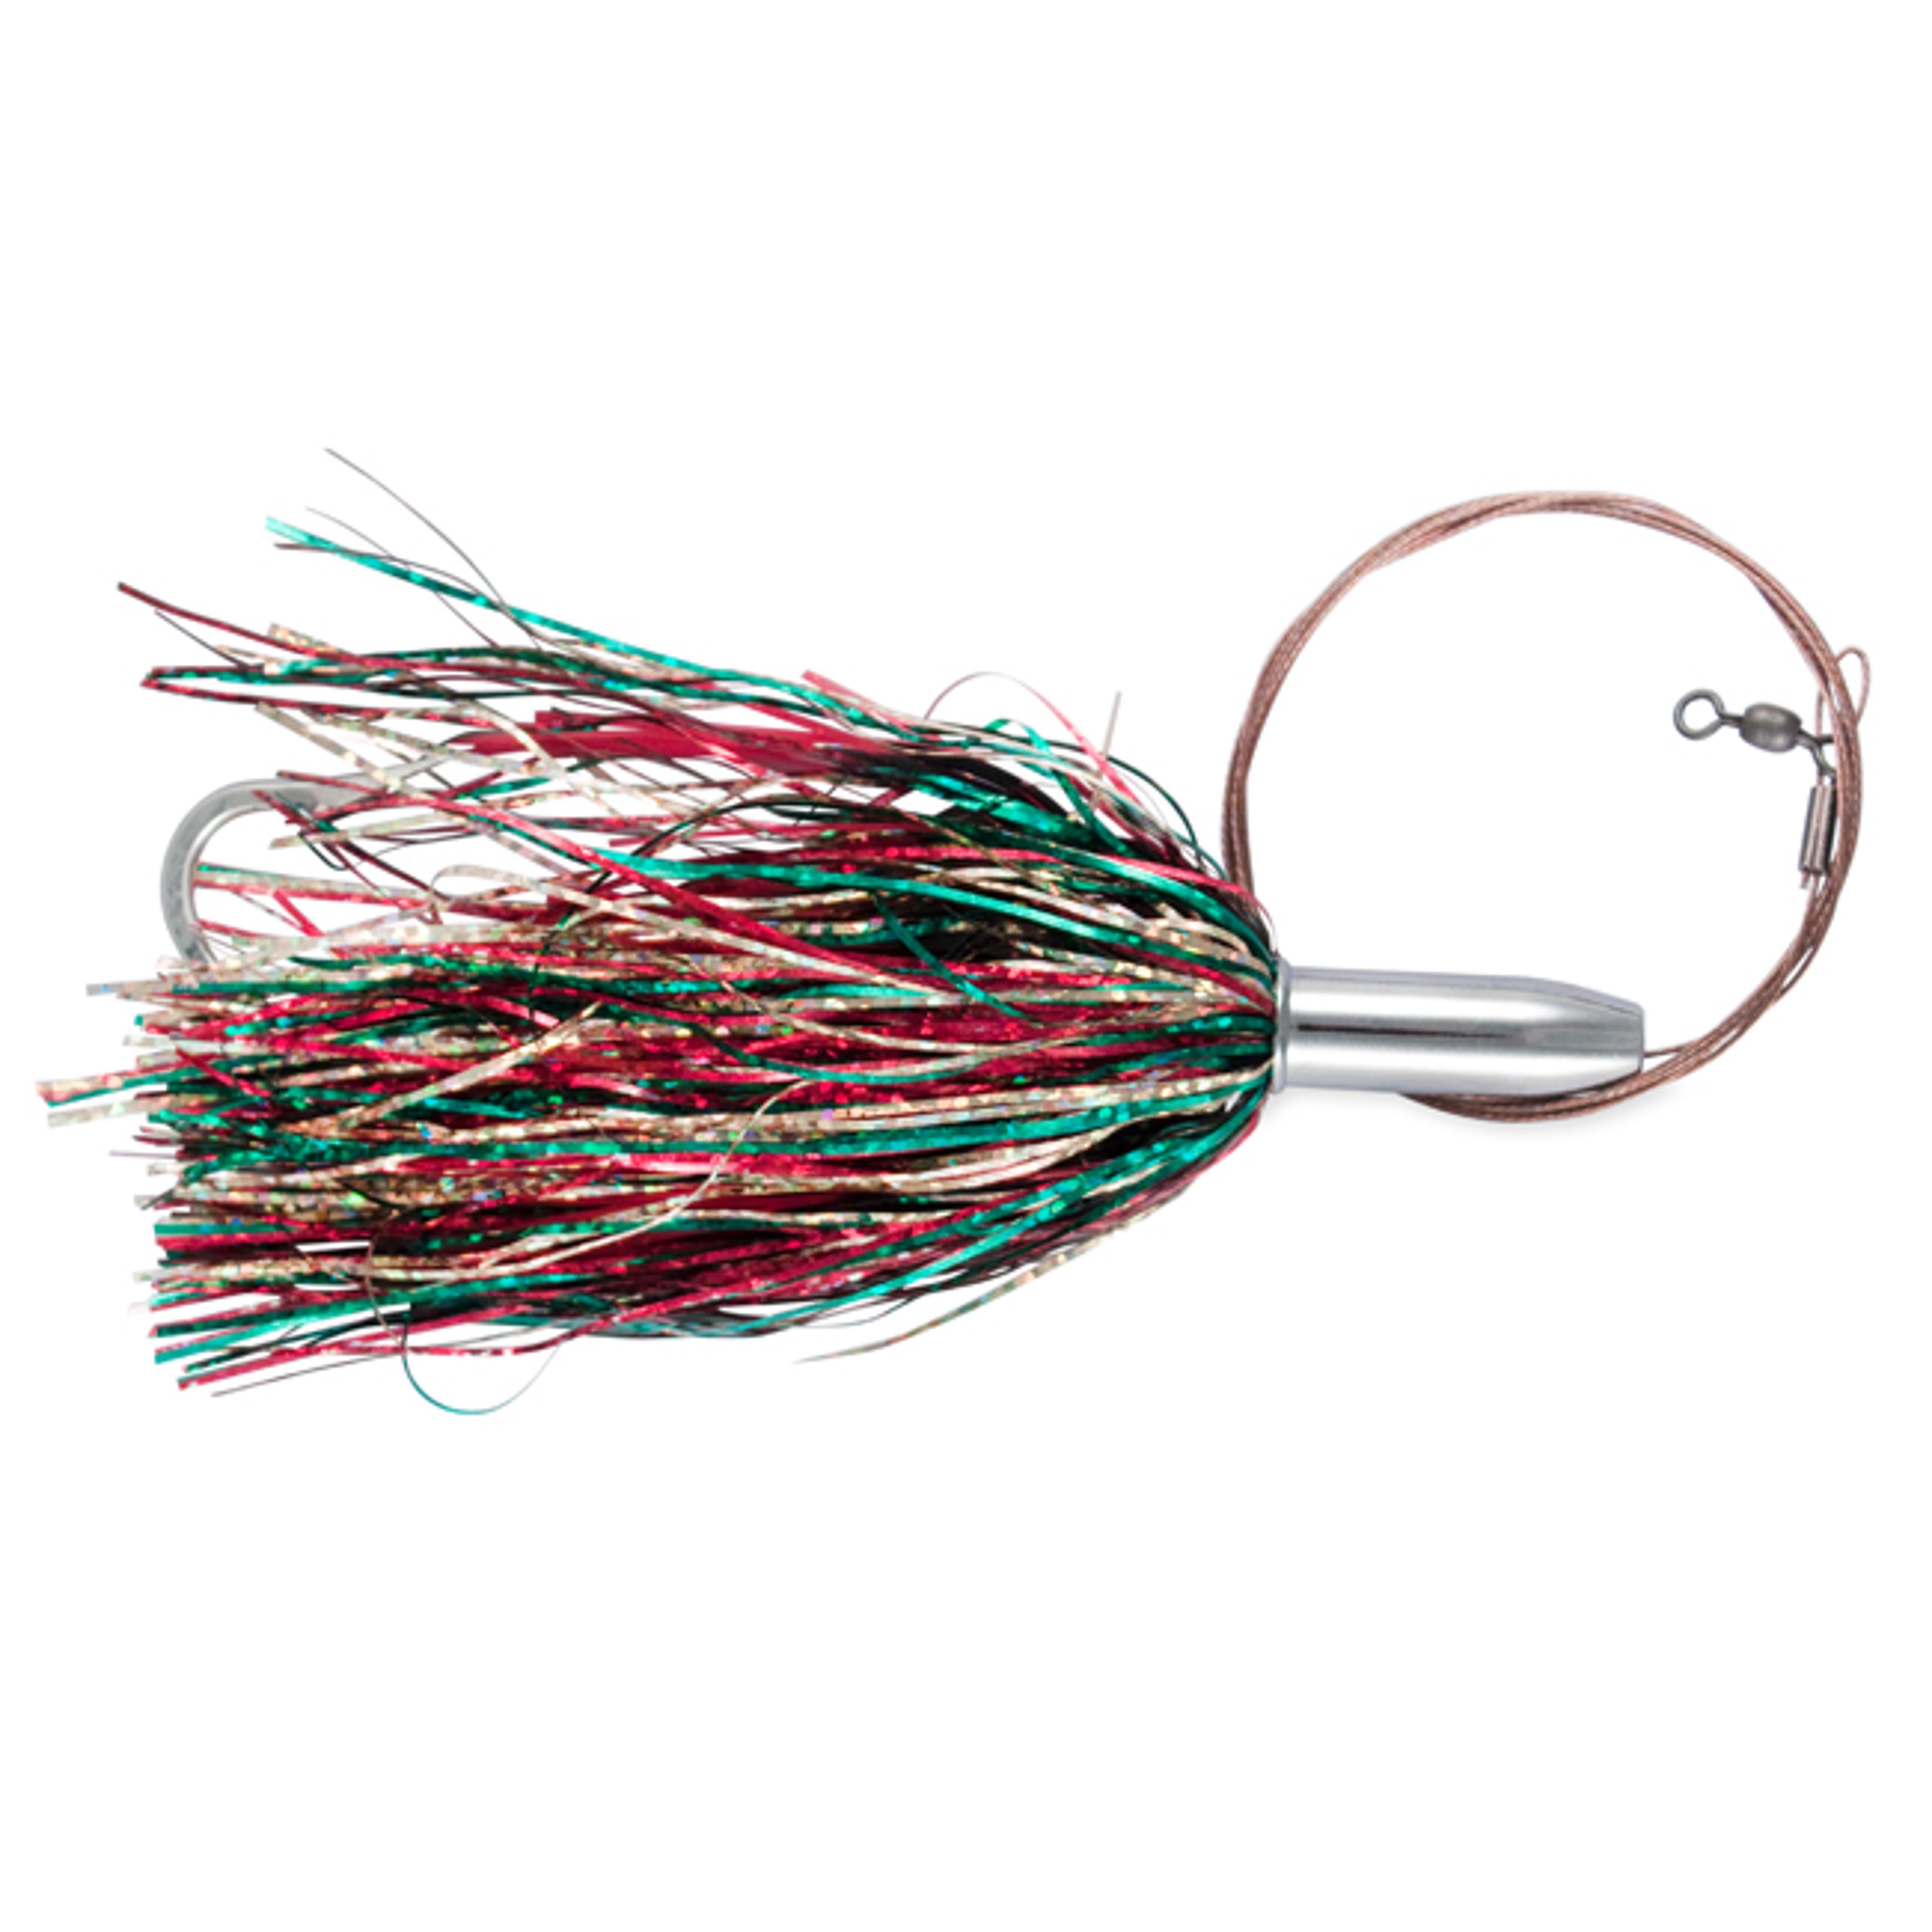 Billy Baits Mini Turbo Slammer Rigged & Ready, Green/Gold/Red/Red